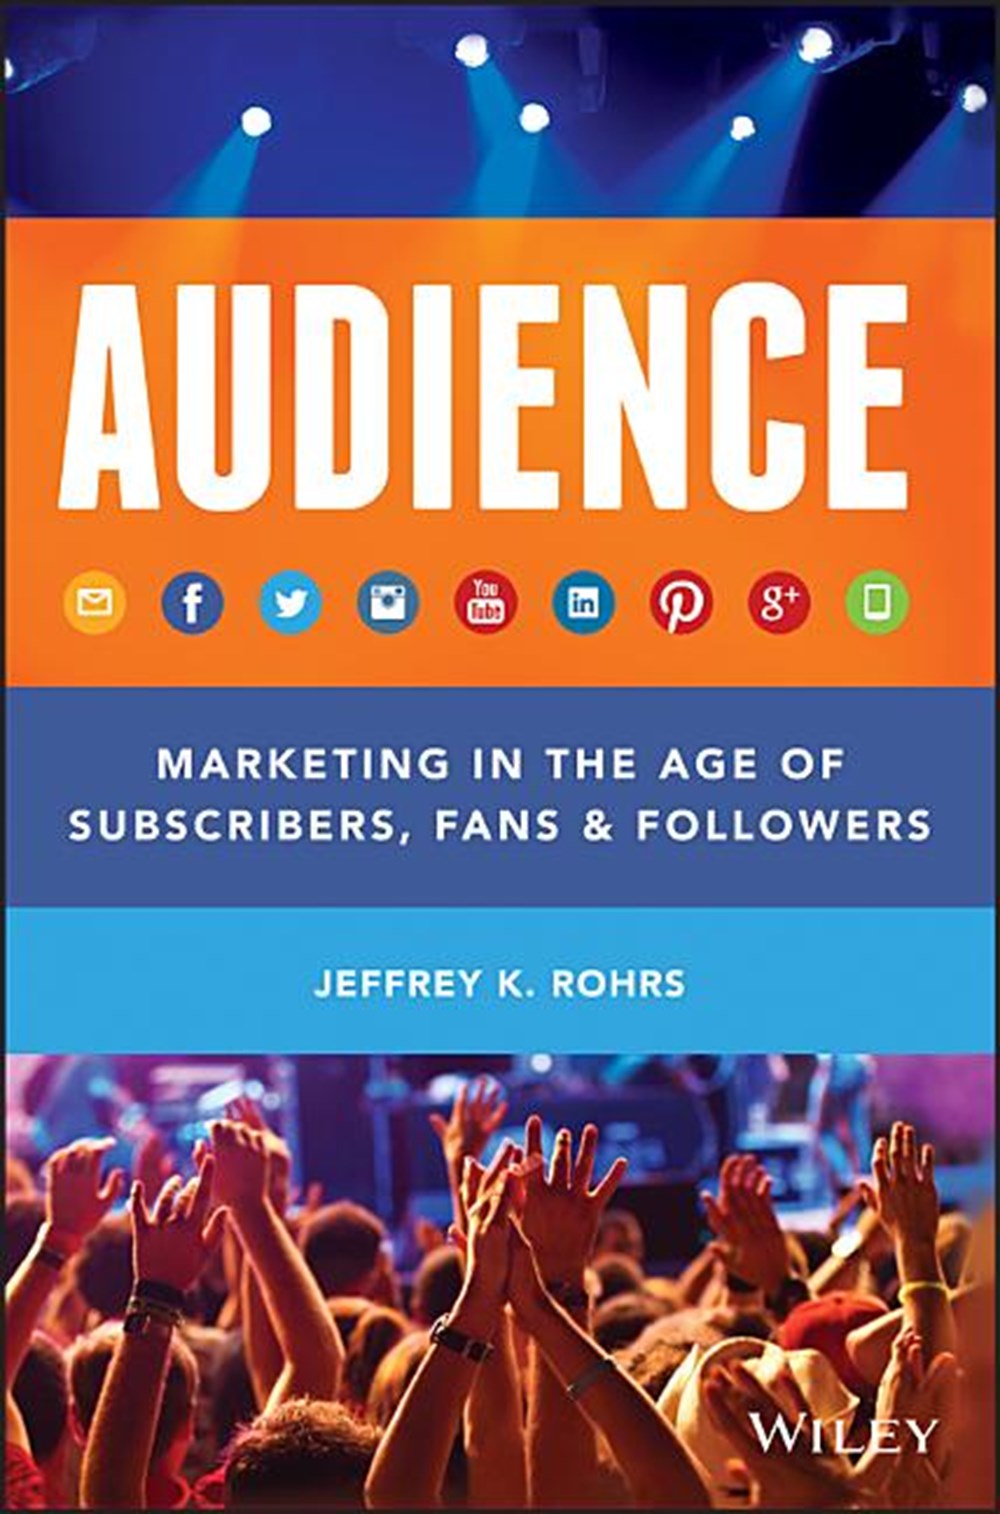 AUDIENCE Marketing in the Age of Subscribers, Fans and Followers